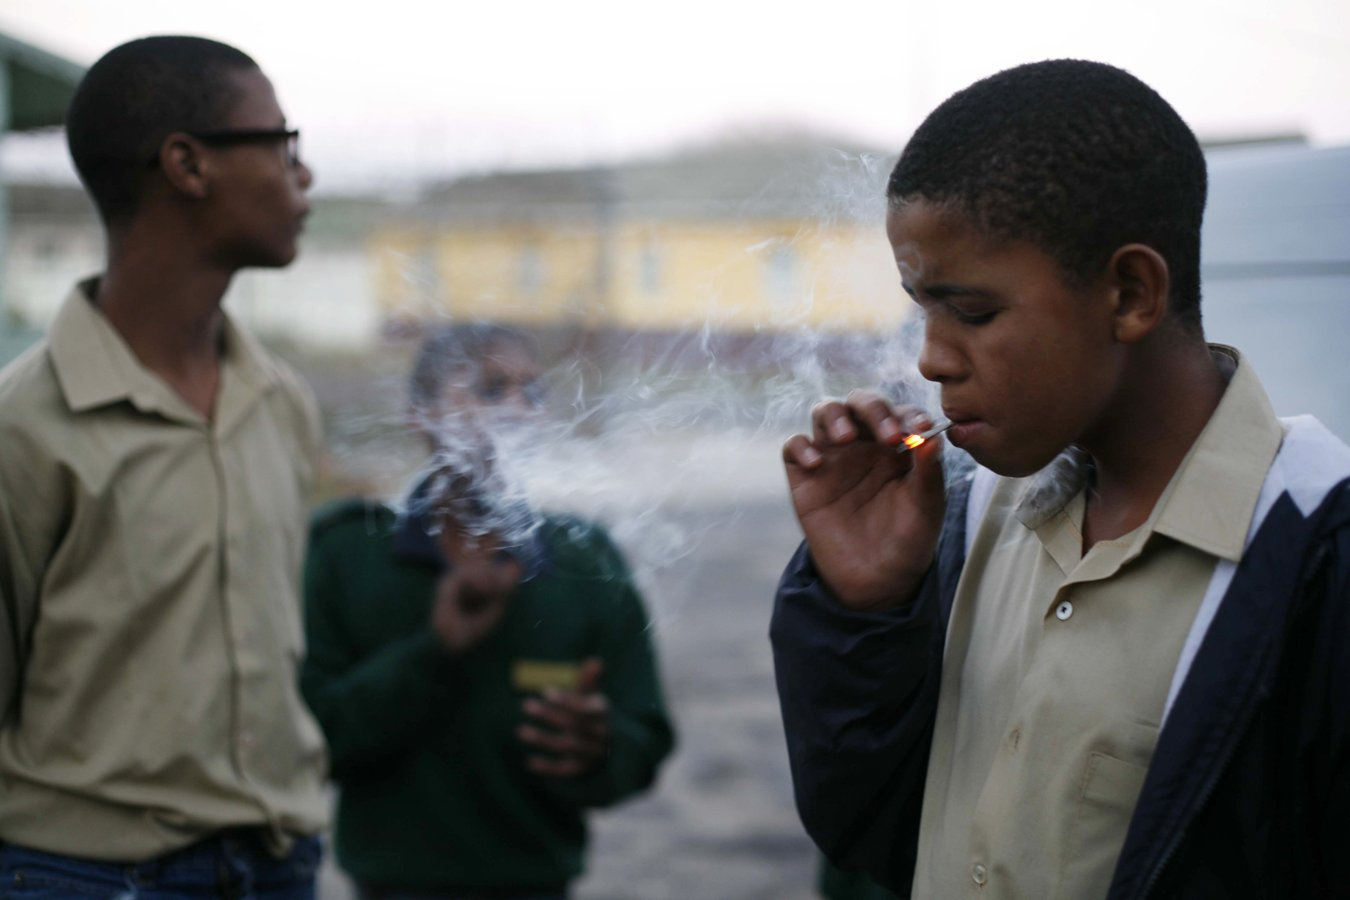 Photo: Ottery Reformatory. Boys too young to serve sentences in adult facilities are sent here. Smoke break after rehearsing for a rendition of Shakespeare’s Julius Caesar, an incredible experience for many of the boys. Cape Town, 2013 ©Yasser Booley. Courtesy of Yasser Booley and Joan Legalamitlwa